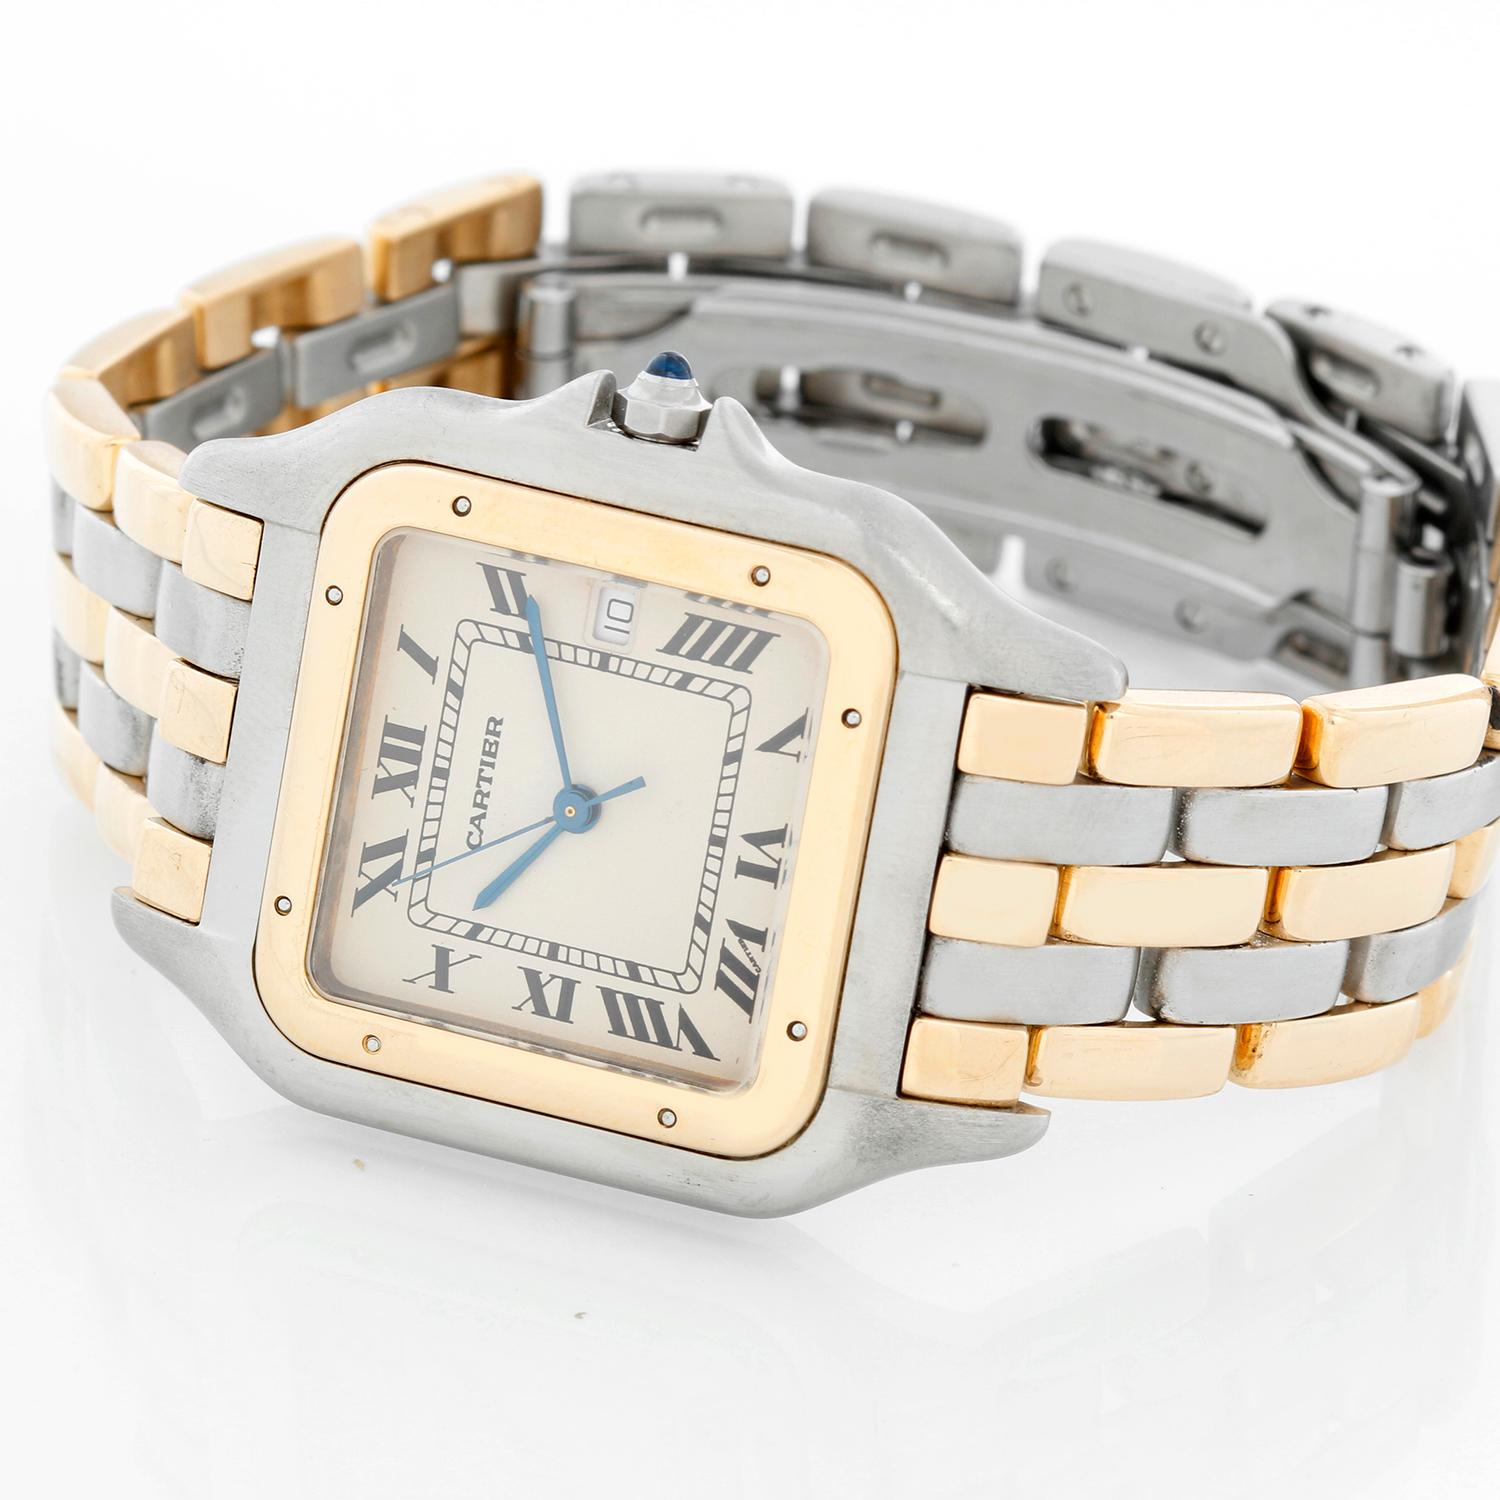 Men's Cartier 3-Row Panther 2-Tone Steel & Gold Watch W25027B8 - Quartz. Stainless steel case with 18k yellow gold bezel (29mm x 40mm). Ivory colored dial with black Roman numerals and date at 3 o'clock. Stainless steel and 18k yellow 3-row Cartier